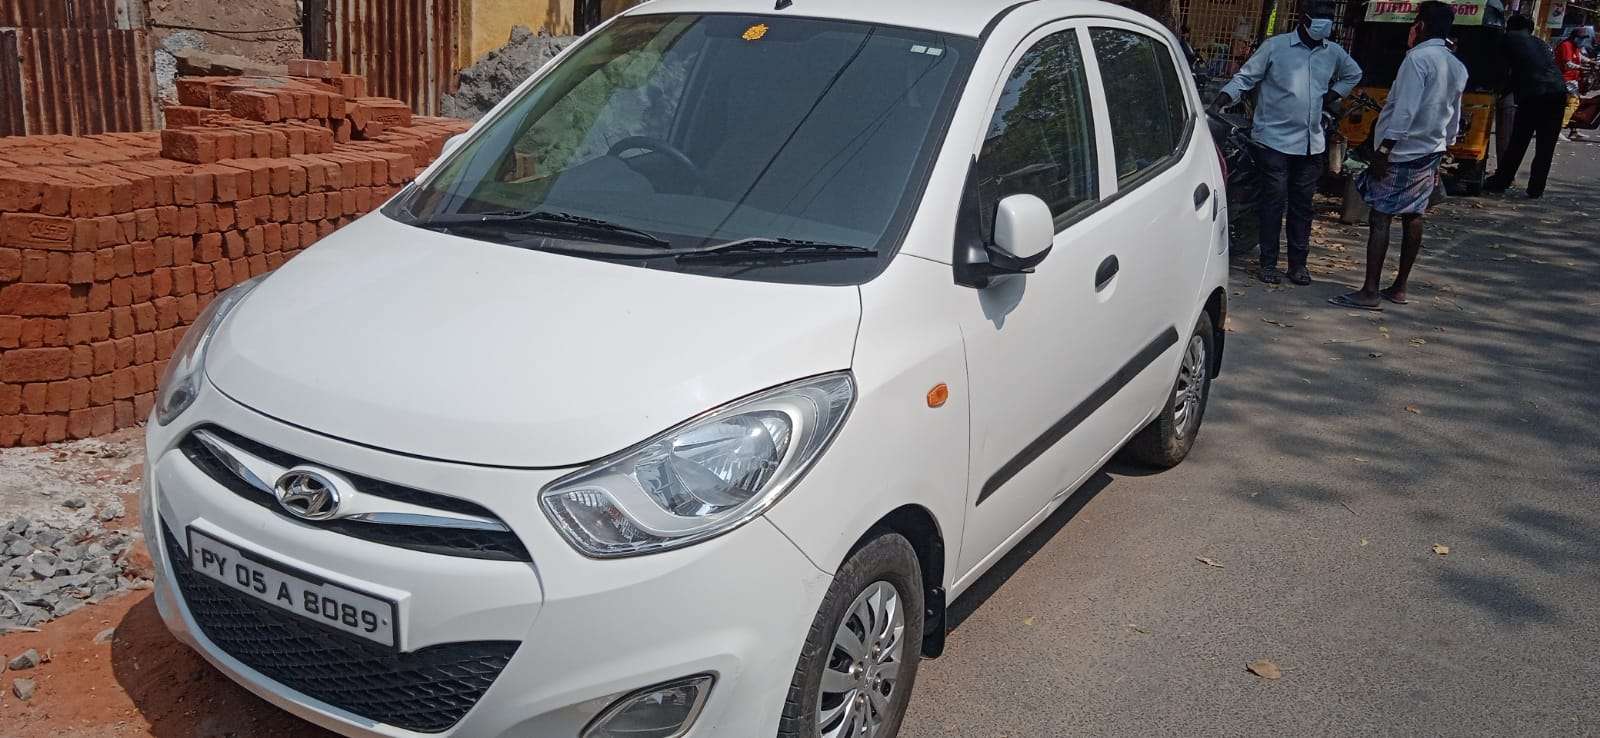 2599-for-sale-Hyundai-i10-Petrol-Second-Owner-2016-PY-registered-rs-385000